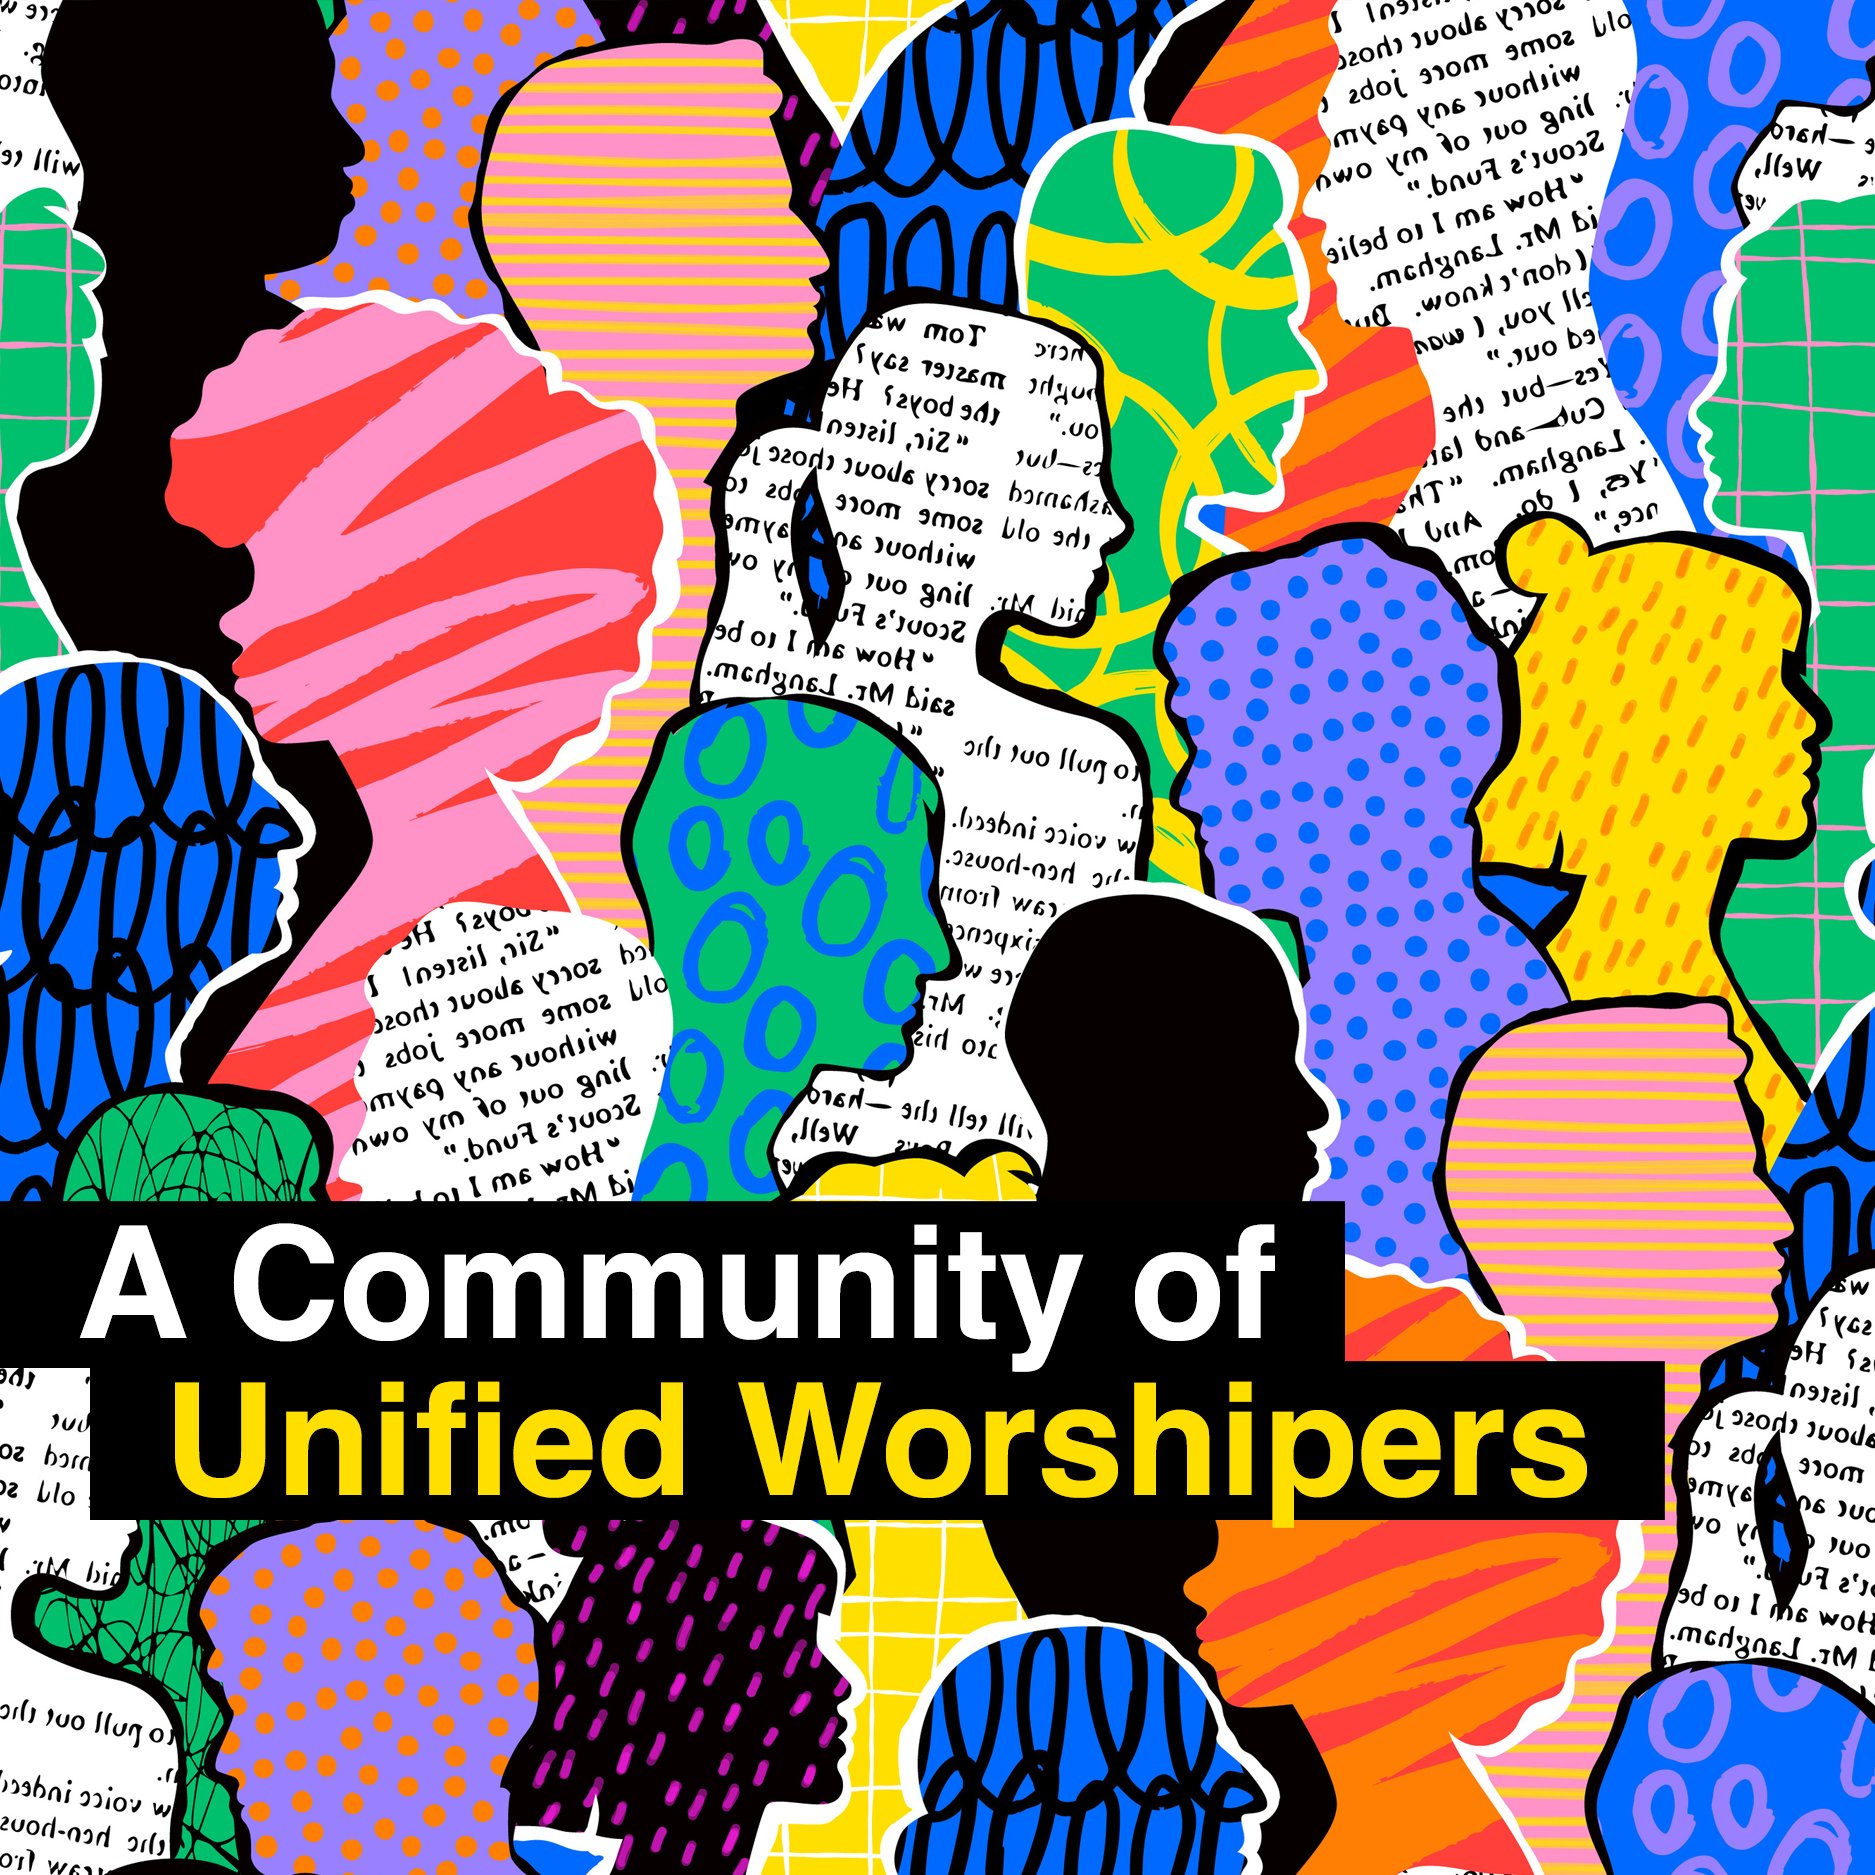 unified worshipers_square.jpg